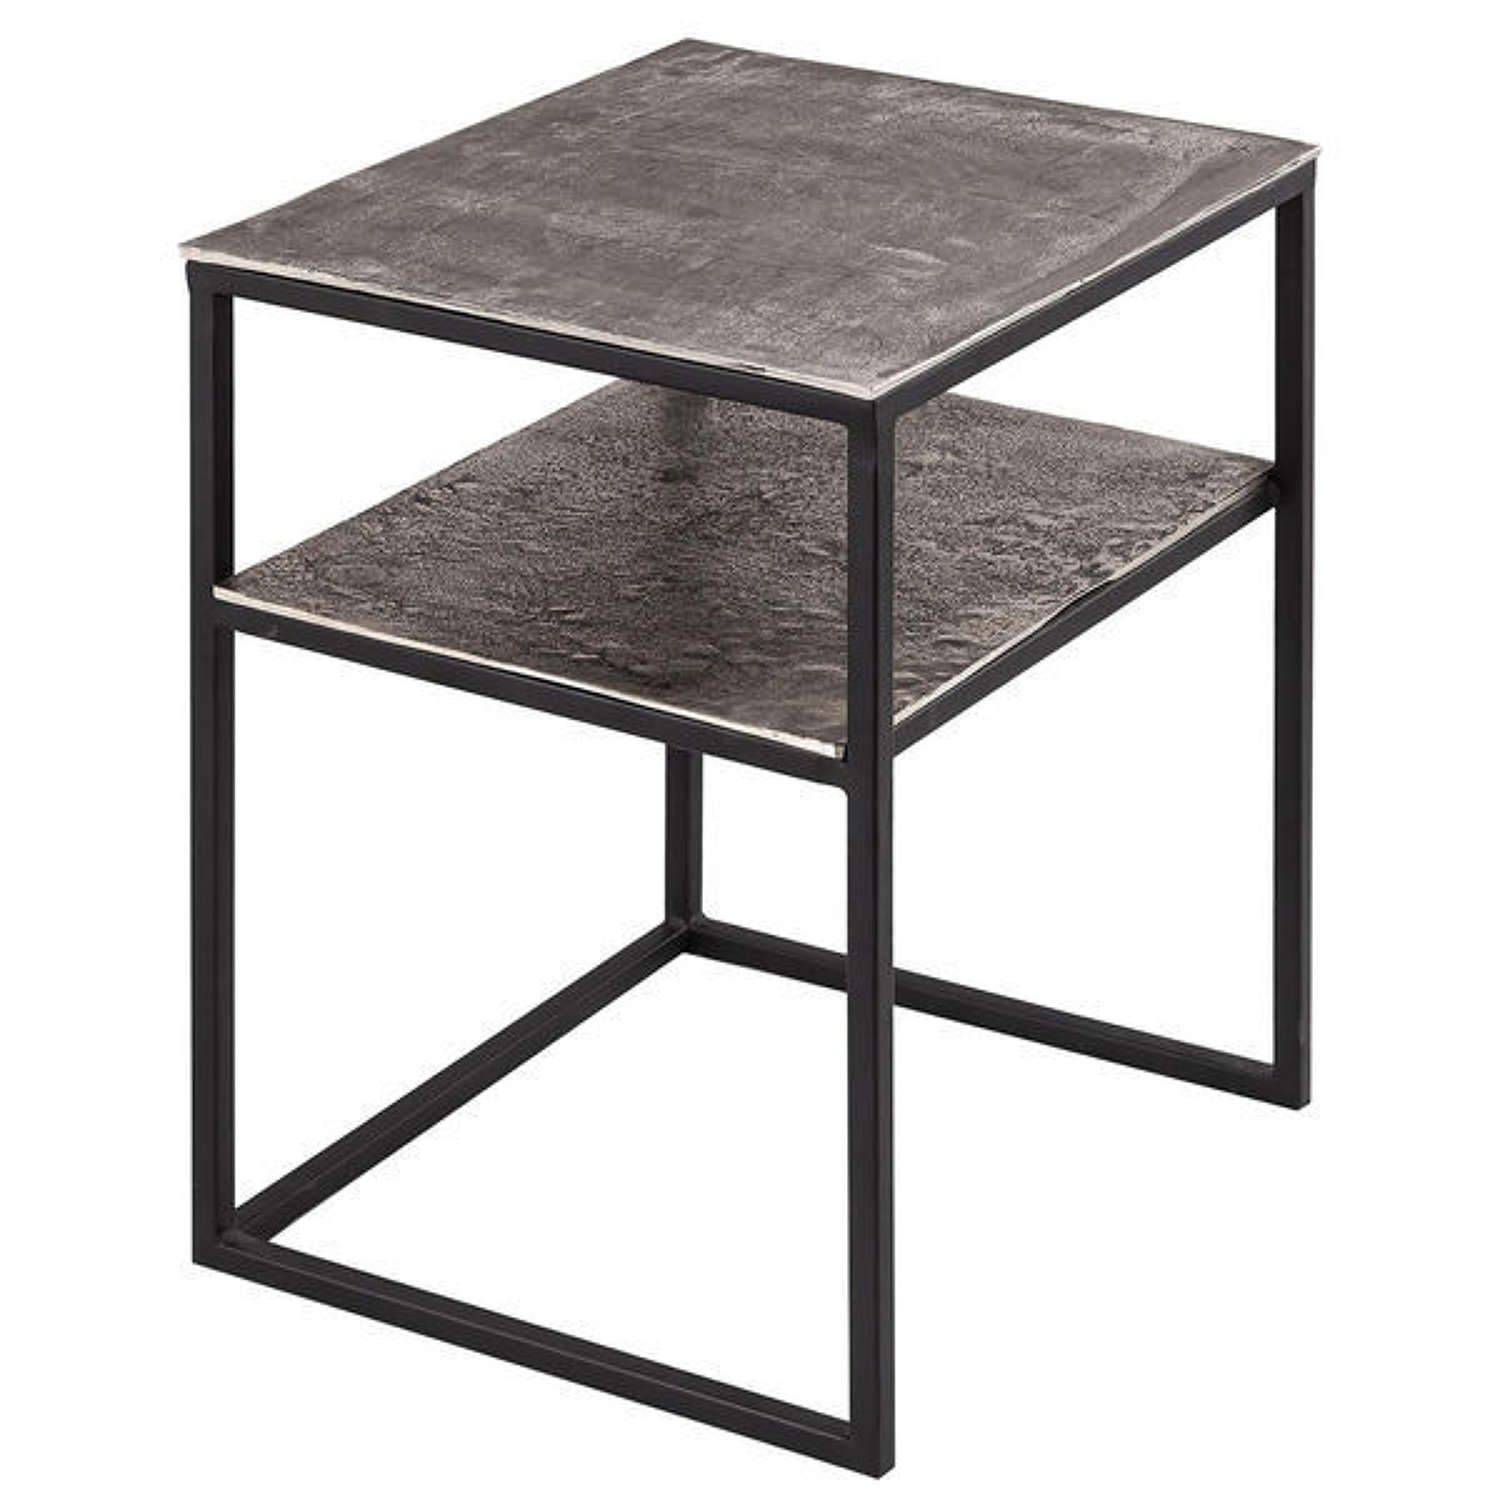 Silver side Table with Shelf  Ref - 21547